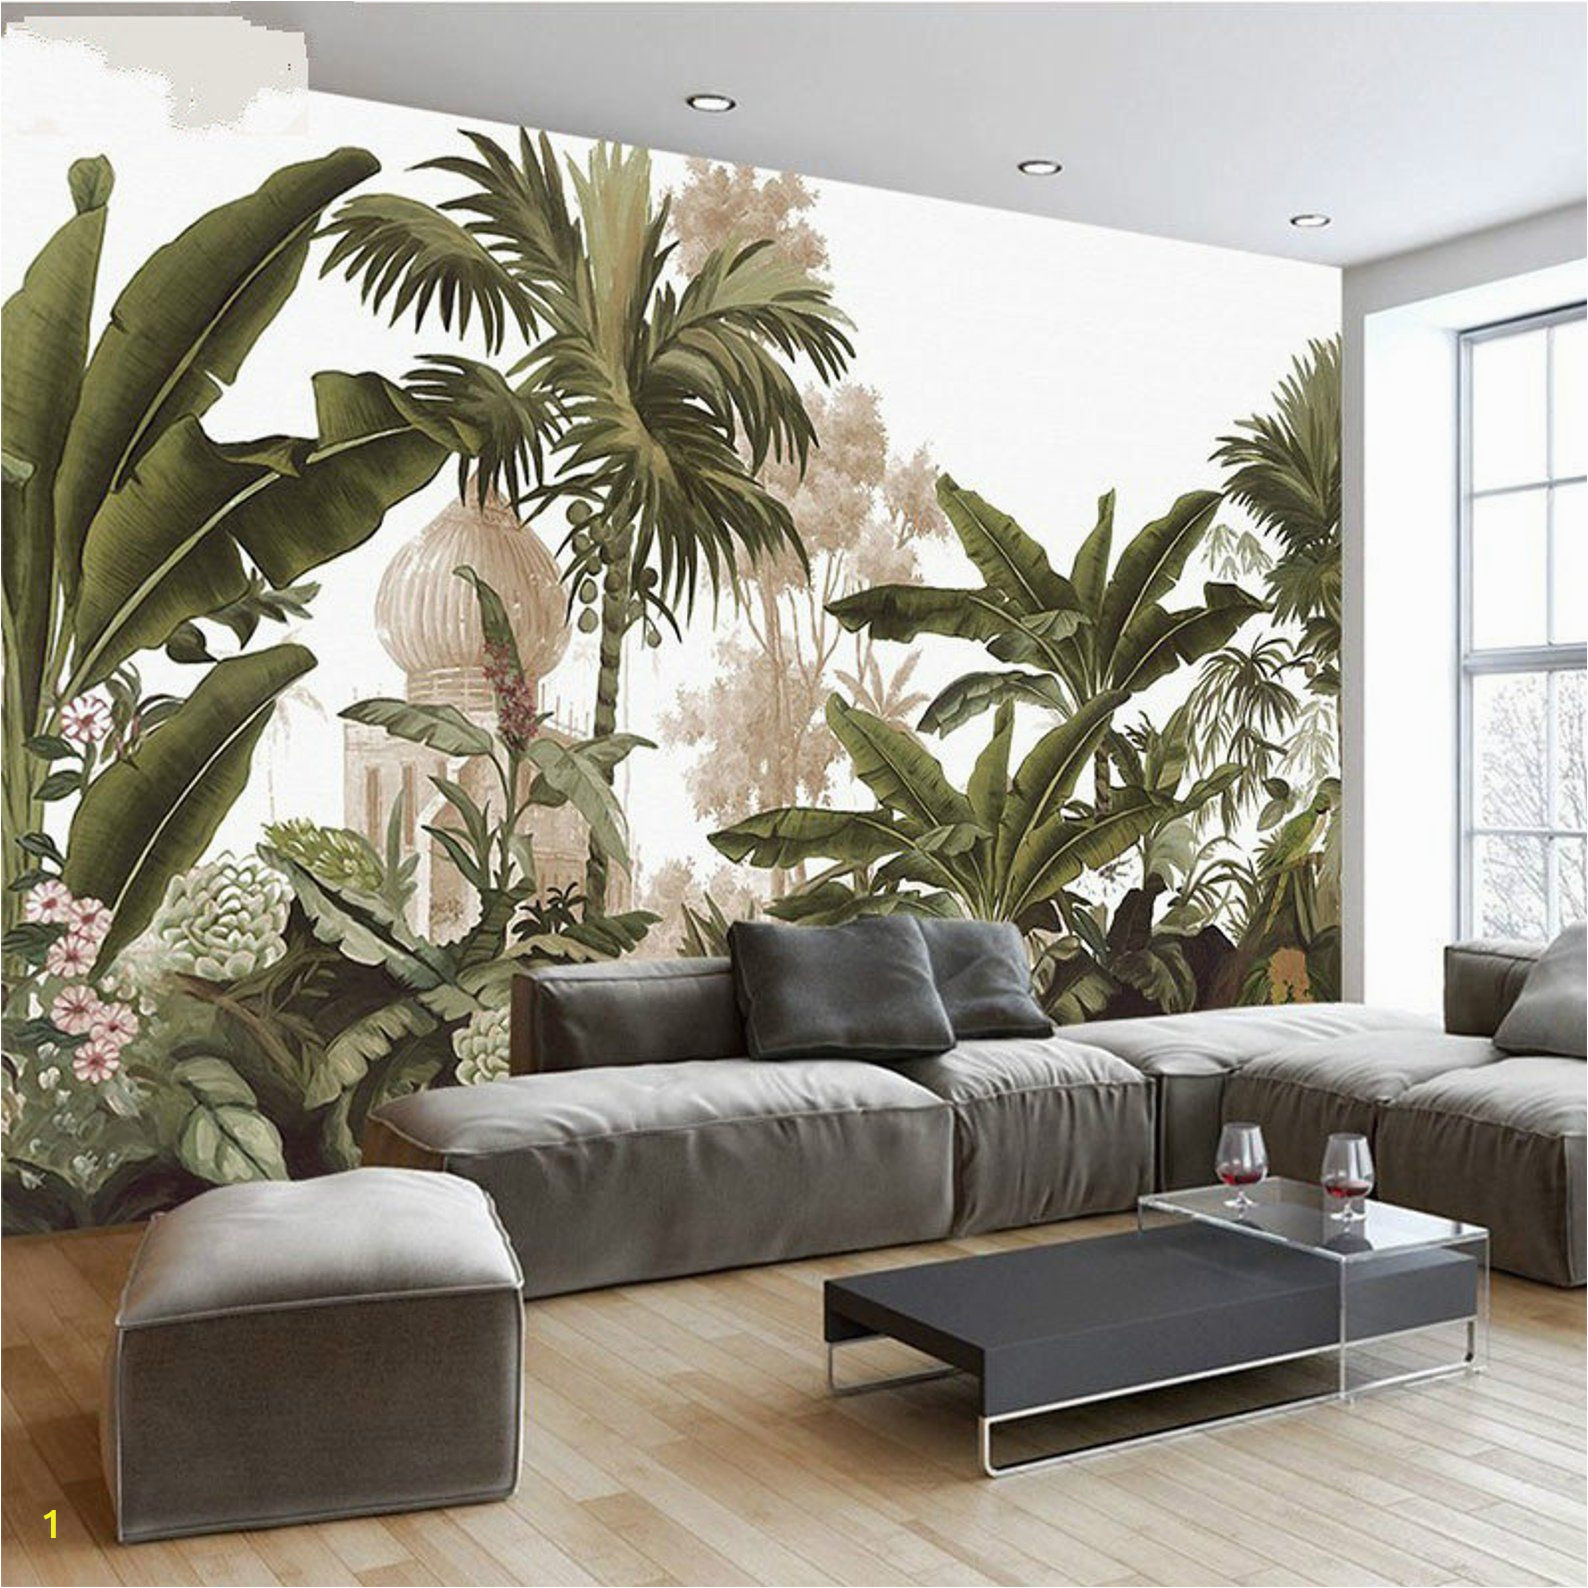 3d Wall Mural Pictures Hand Painted Tropical Rainforest forest Wallpaper Wall Mural